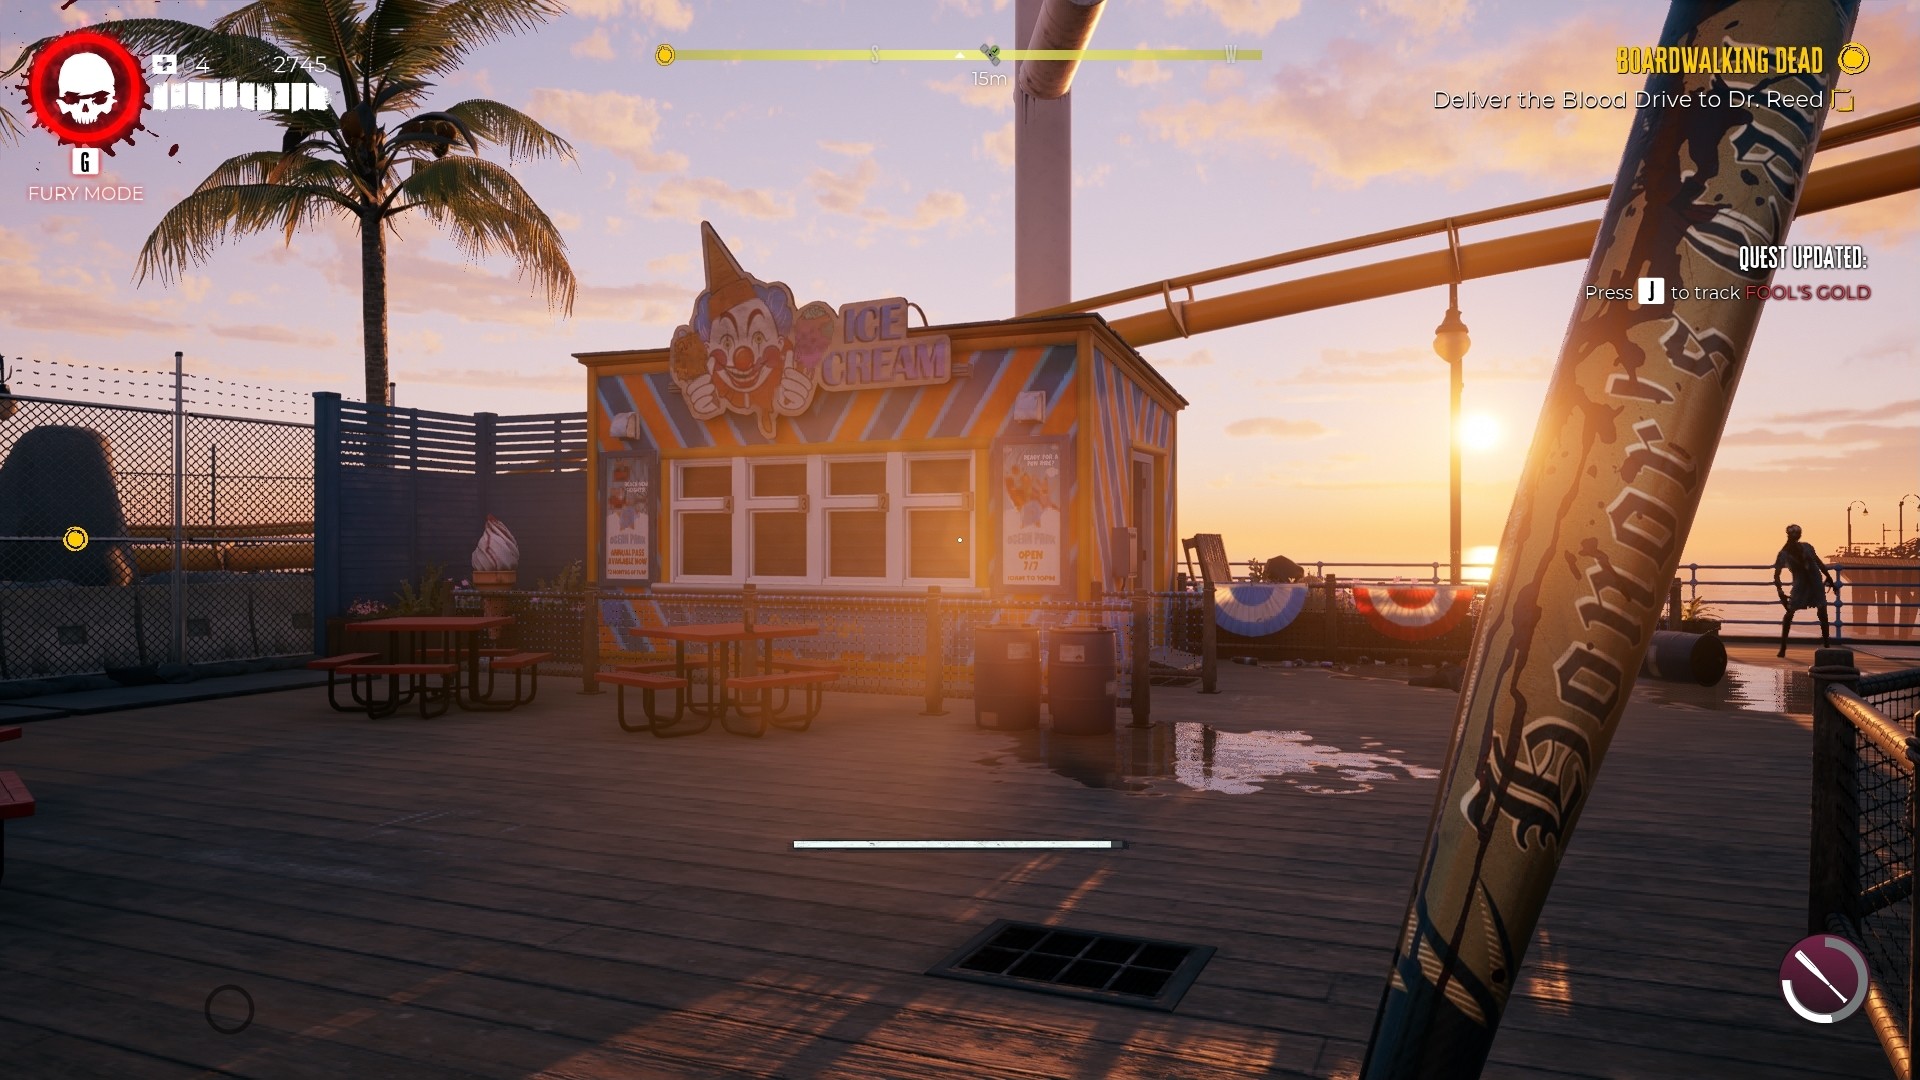 Dead Island 2 screenshot showing an ice cream shack on a pier with clown iconography and a suspicious blood stain near the door